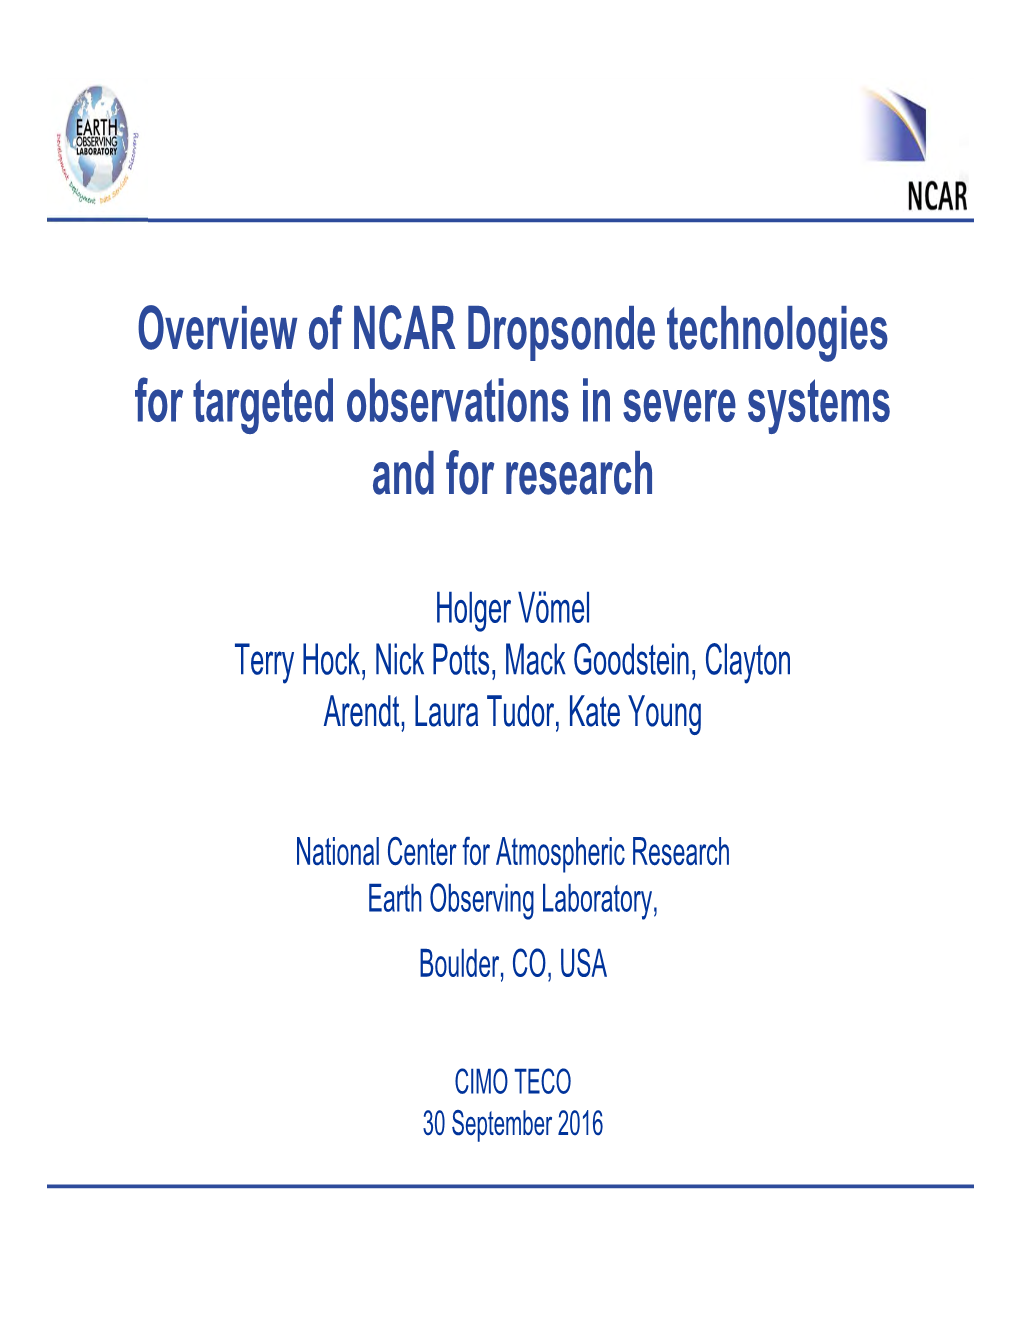 Overview of NCAR Dropsonde Technologies for Targeted Observations in Severe Systems and for Research